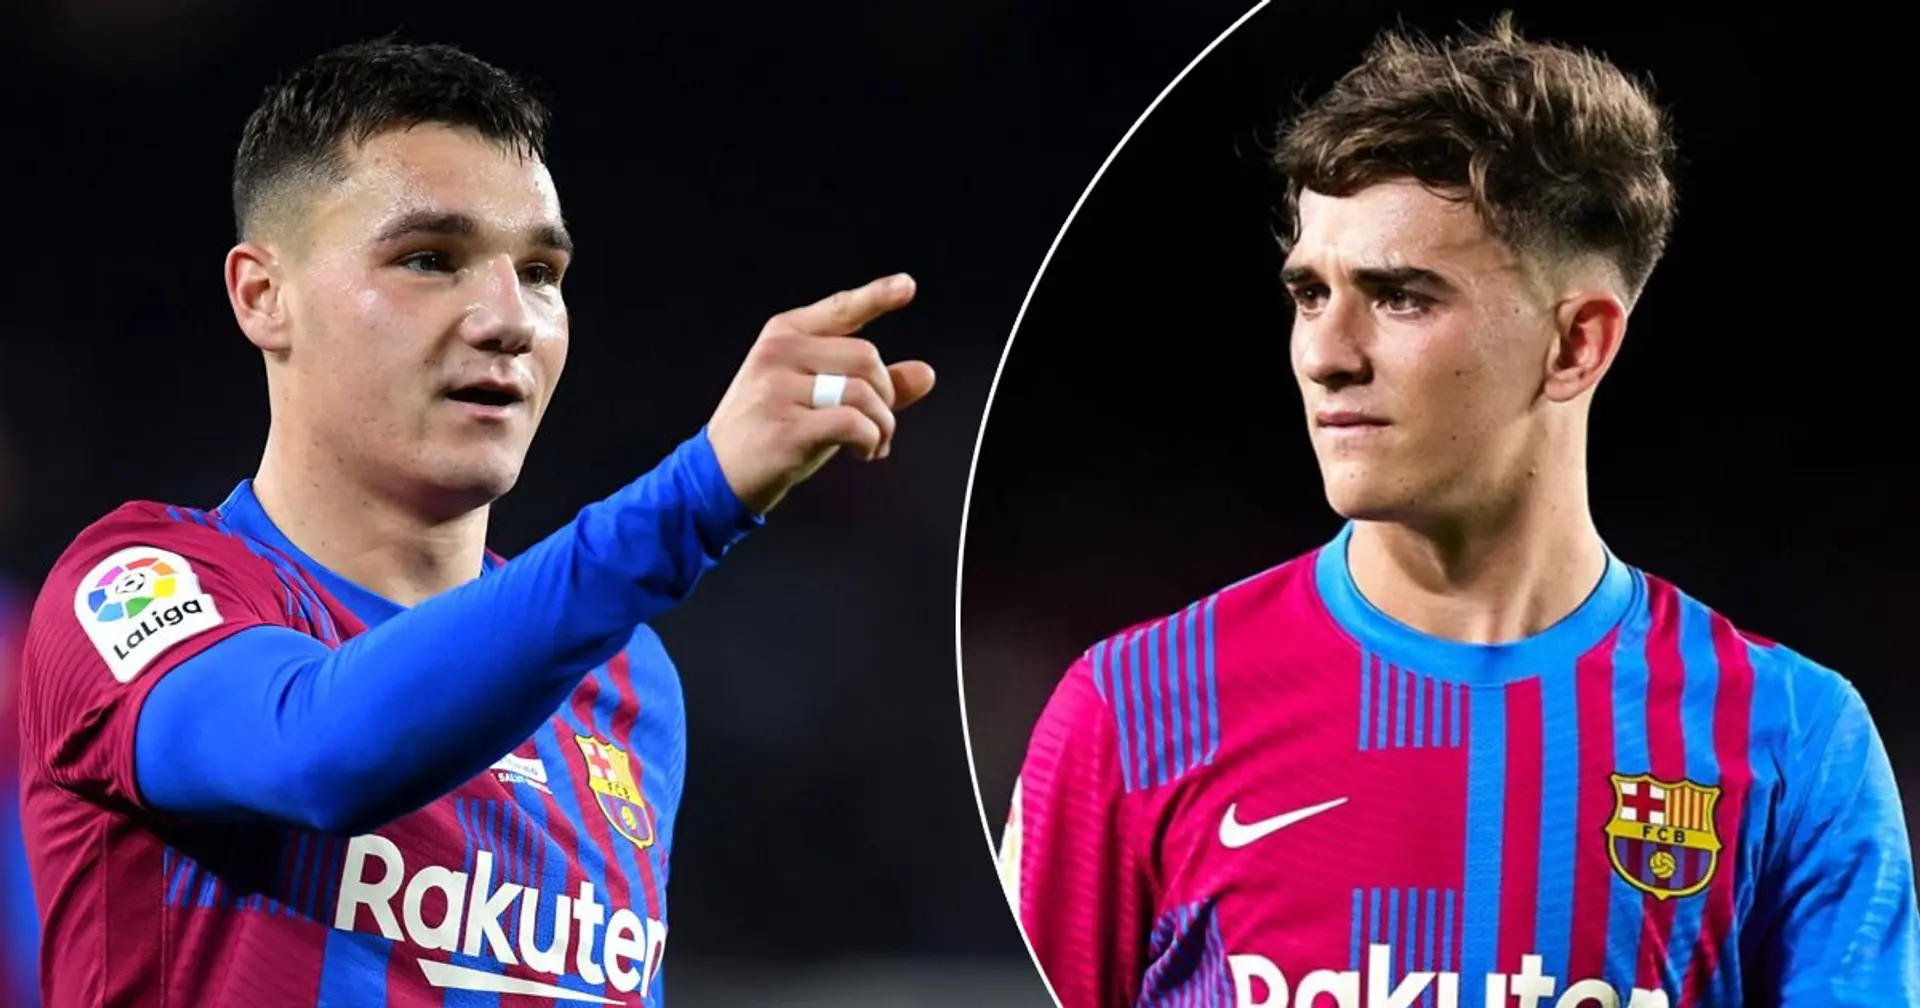 Barca B suffer embarassing defeat and 3 more unde-radar stories